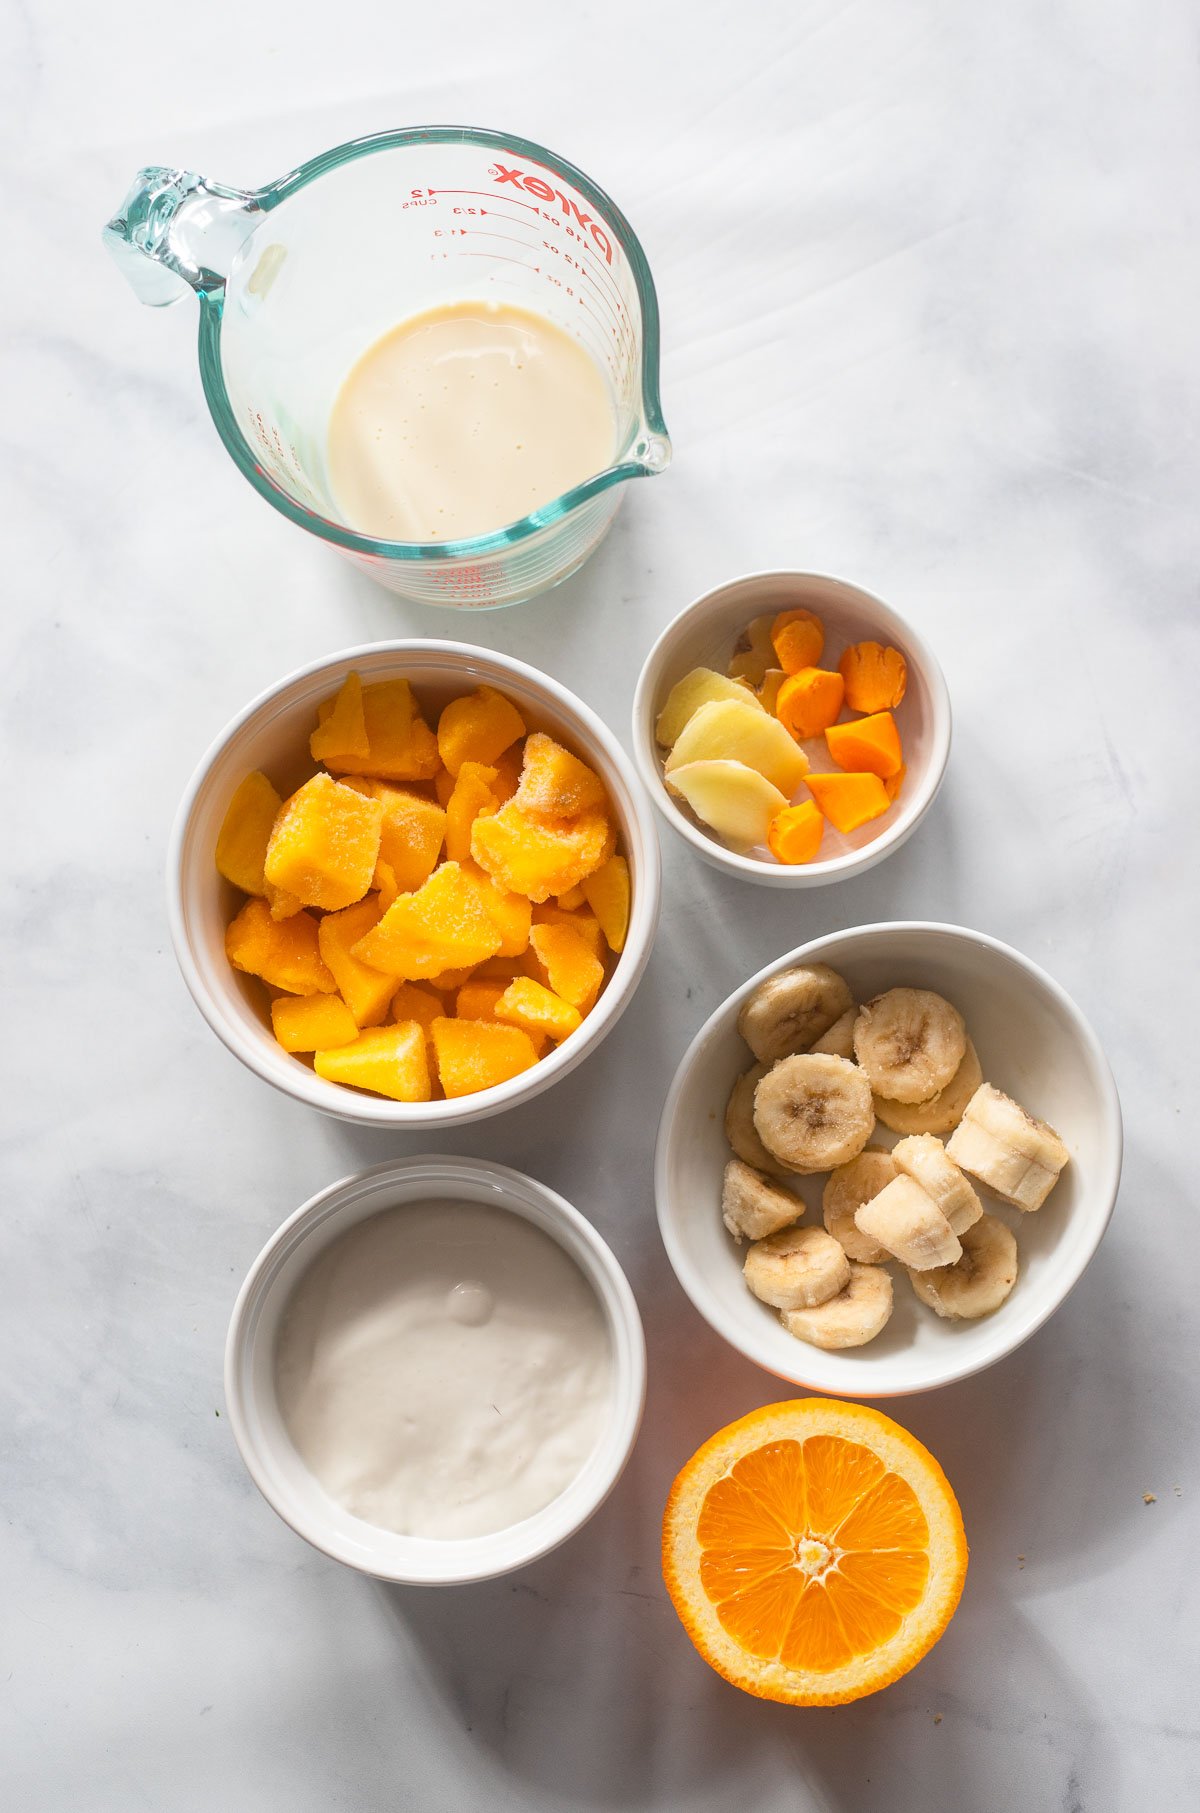 mango turmeric smoothie ingredients in small bowls set out on a marble backdrop.